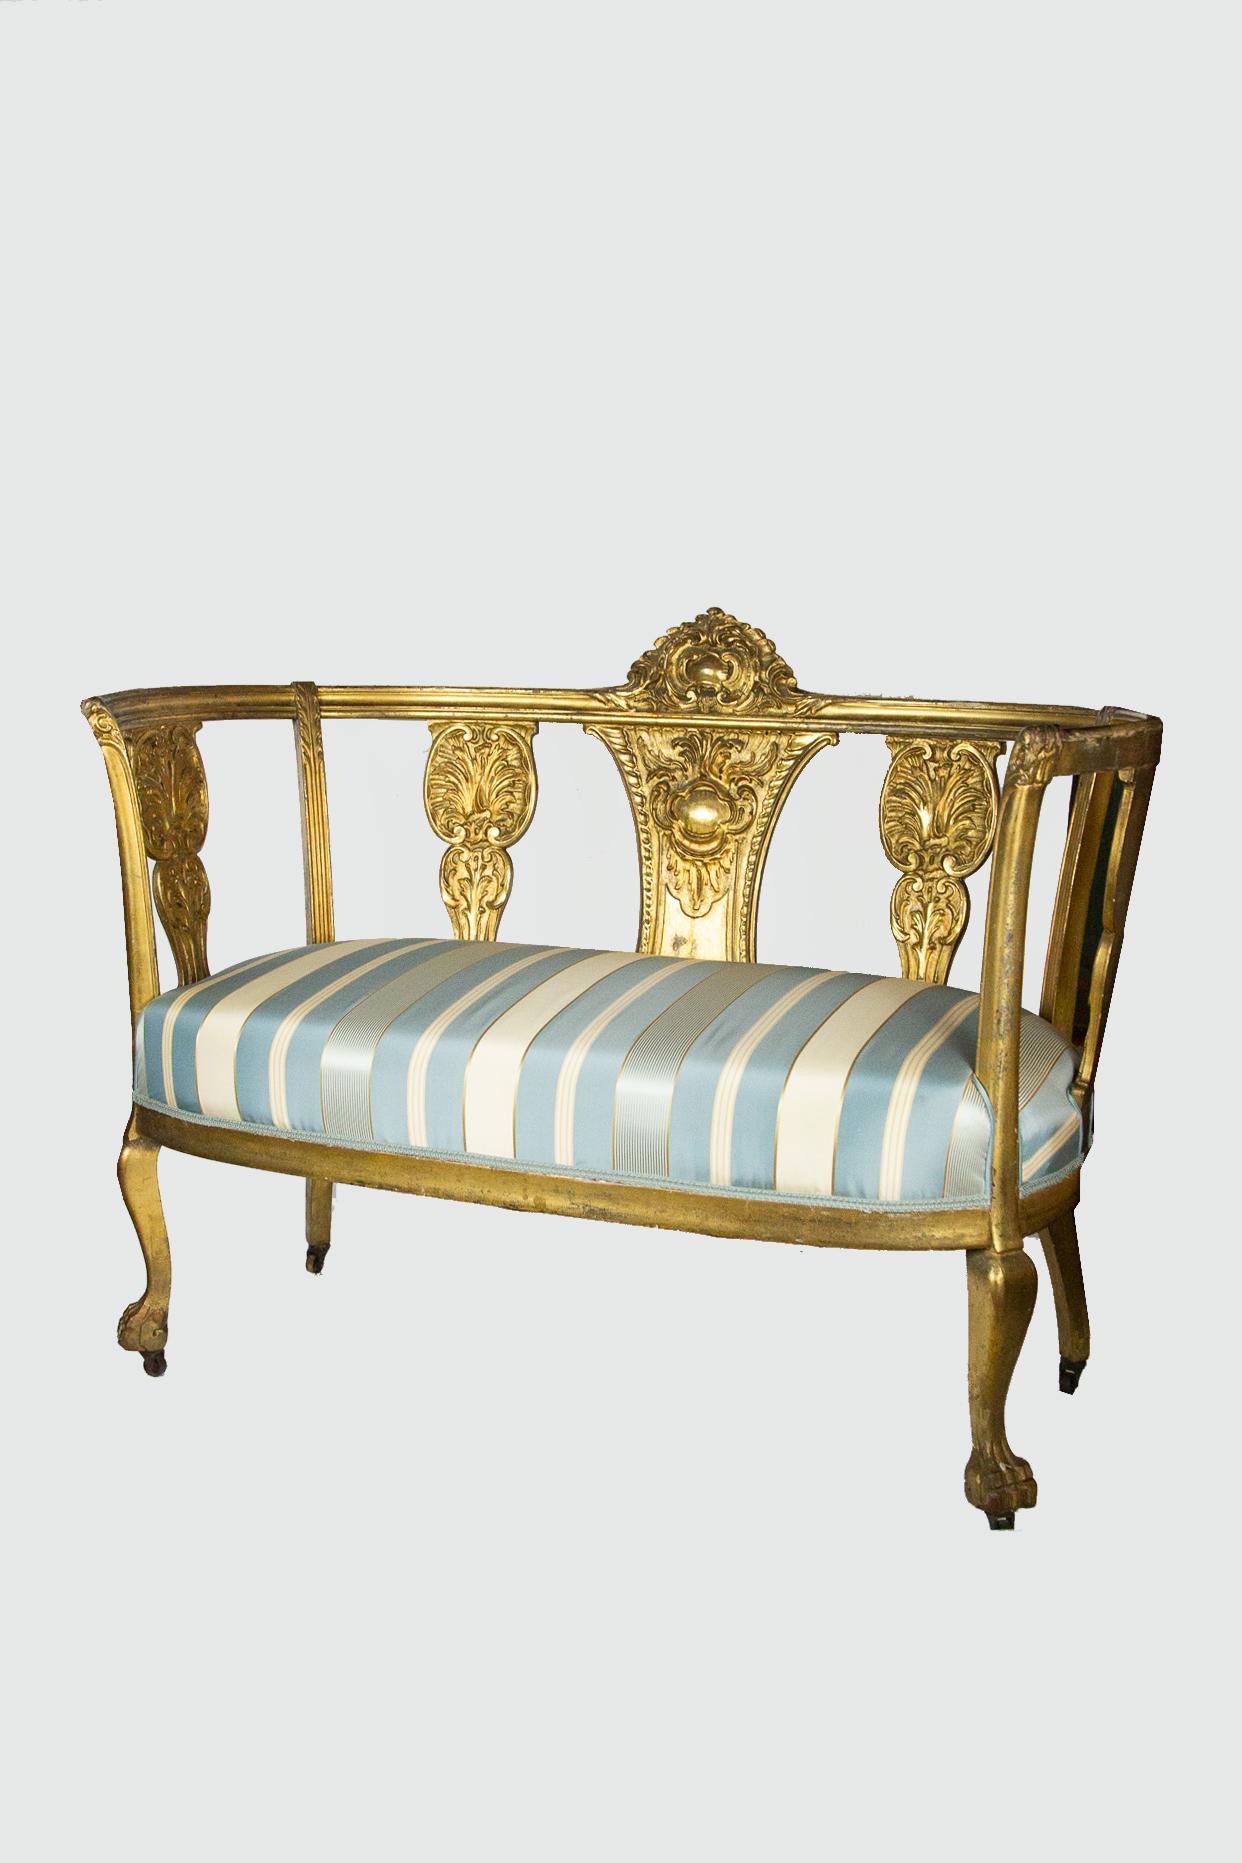 Late 19th century Gustavian style gilt settee and matching chair newly reupholstered. Former restorations and repair to back left leg of settee. On Casters.